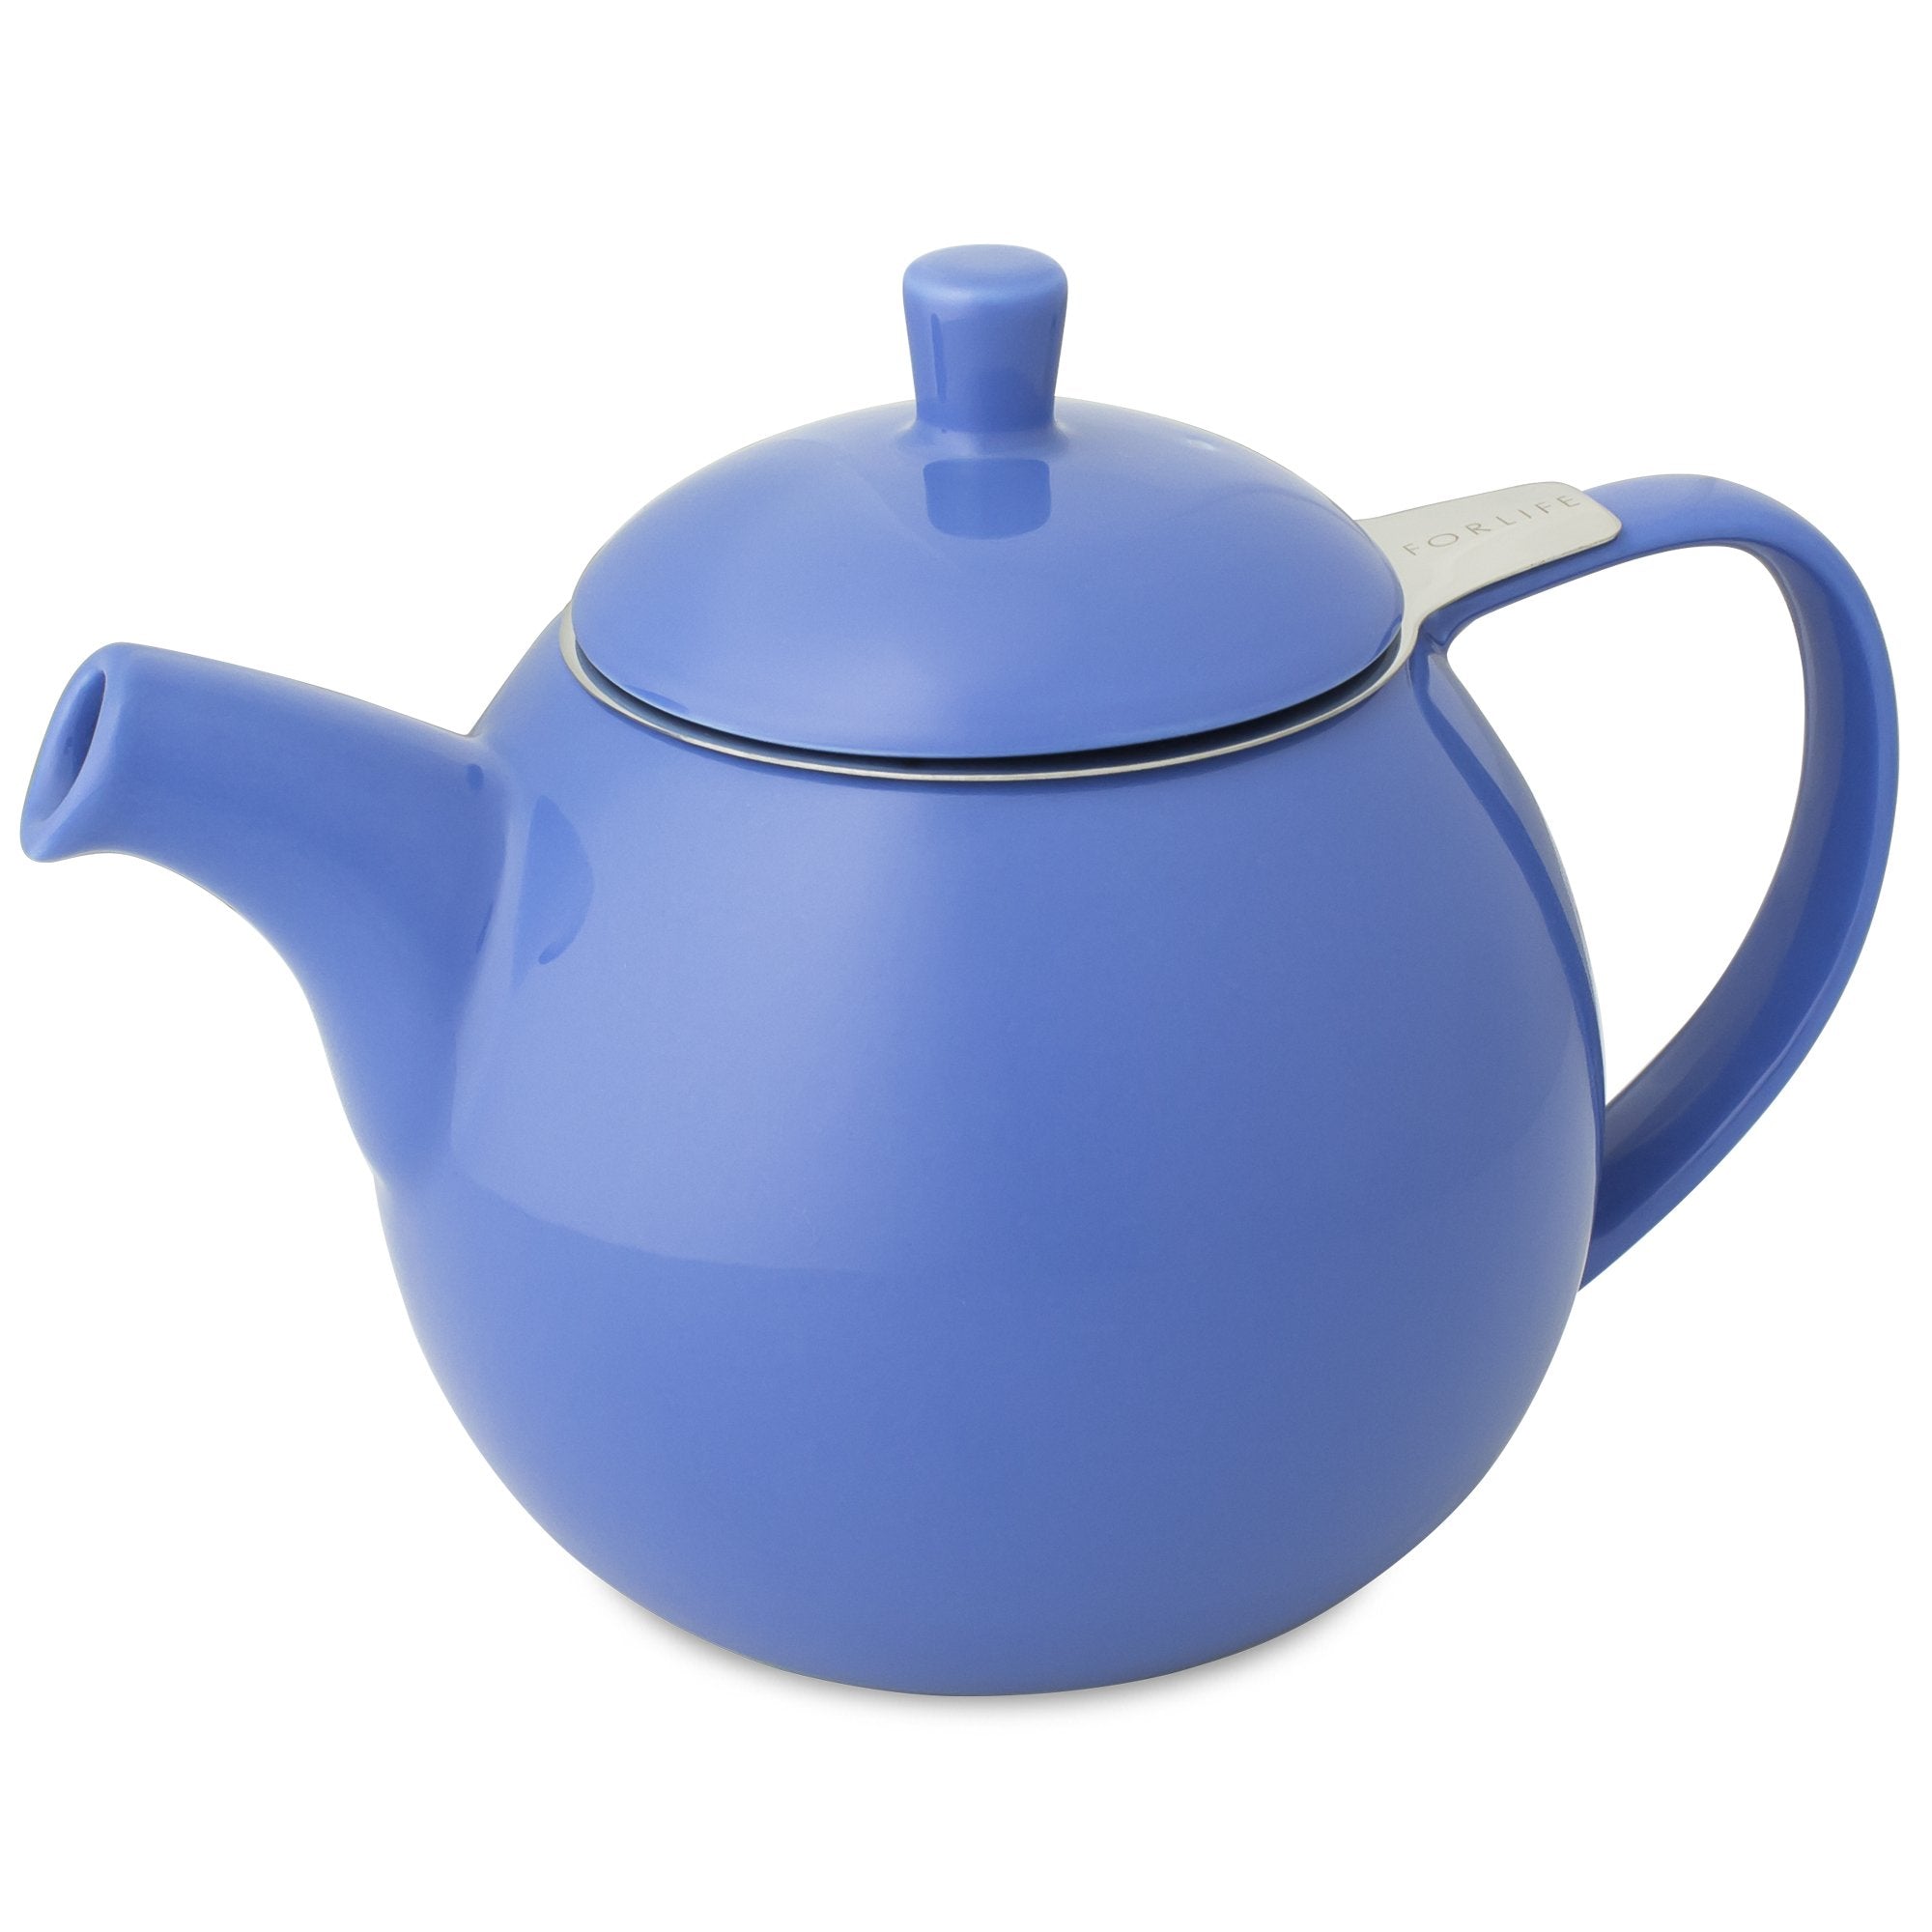 Satin Teapot - Ceramic Teapot with Infuser, Stainless Steel